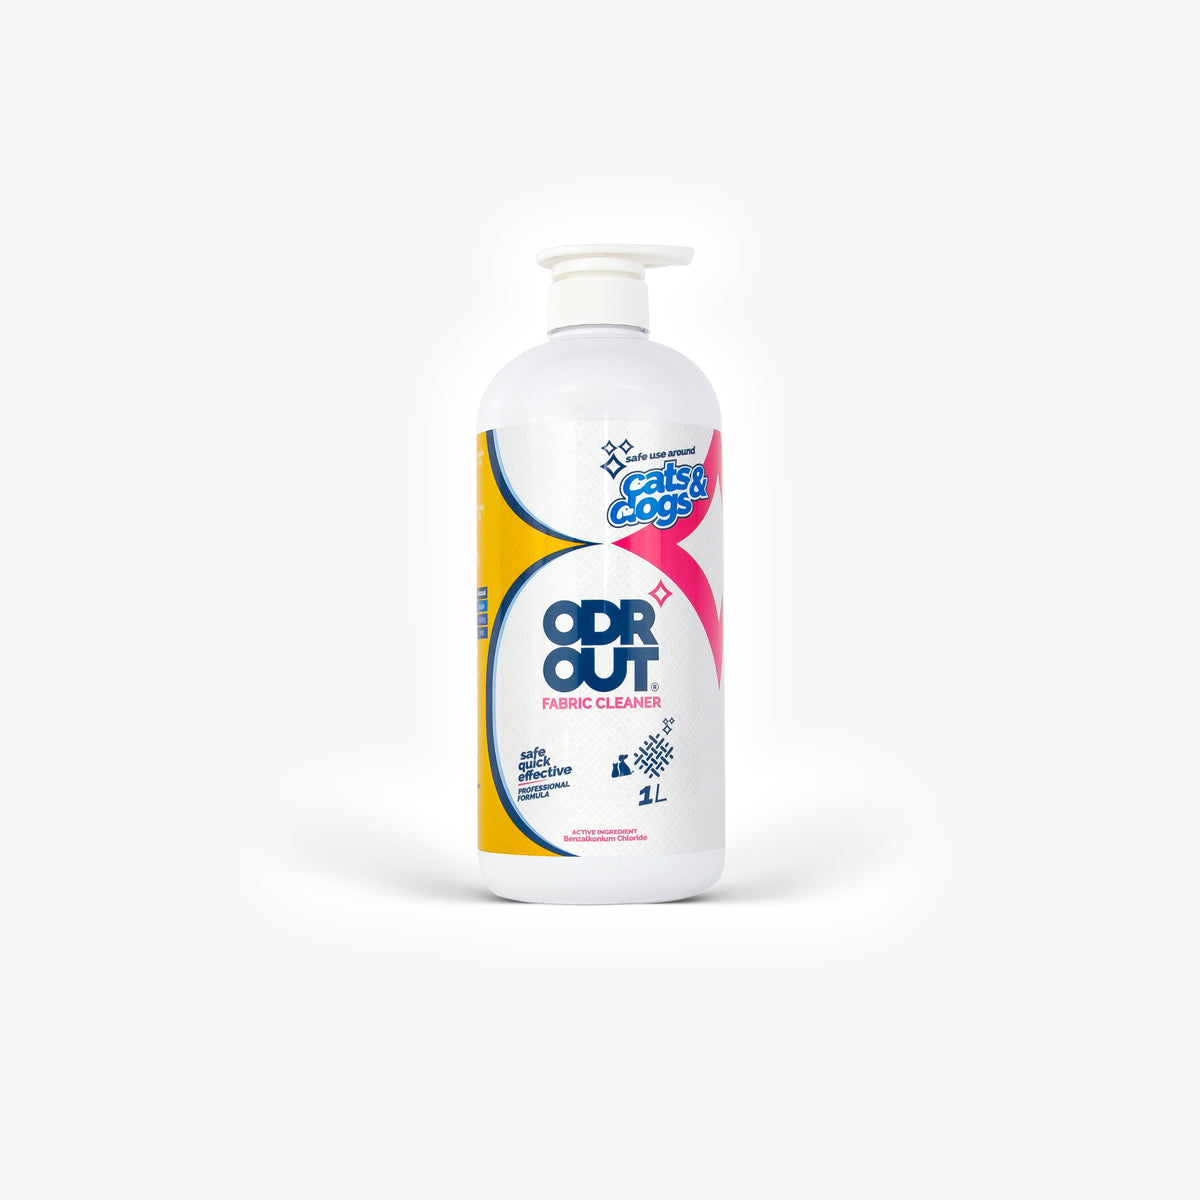 ODR OUT Anti Bacterial Fabric Cleaner